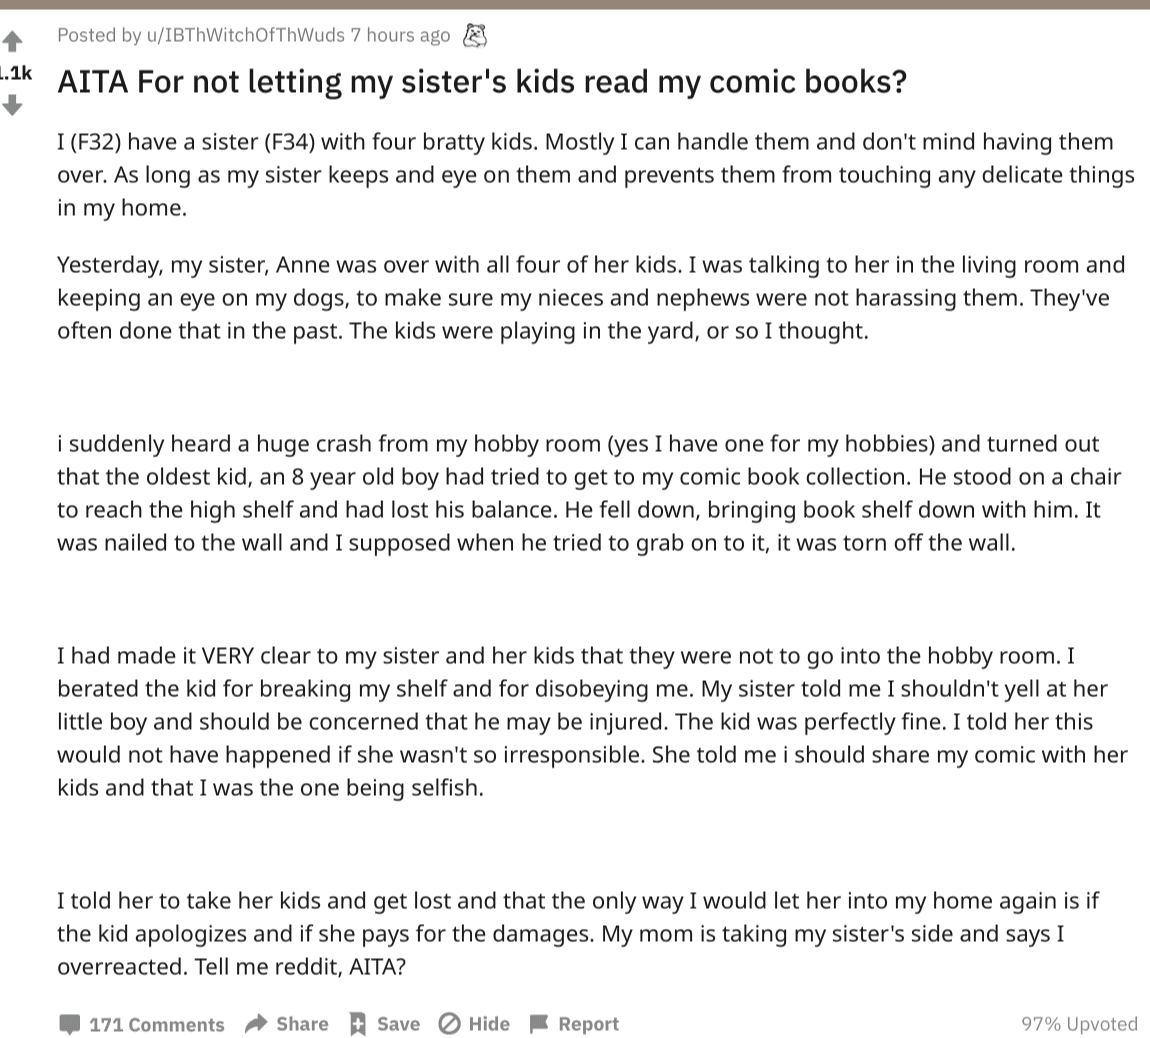 Reddit user asking if he was on fault for not letting his nephews and nieces read his comic books | Photo: Reddit